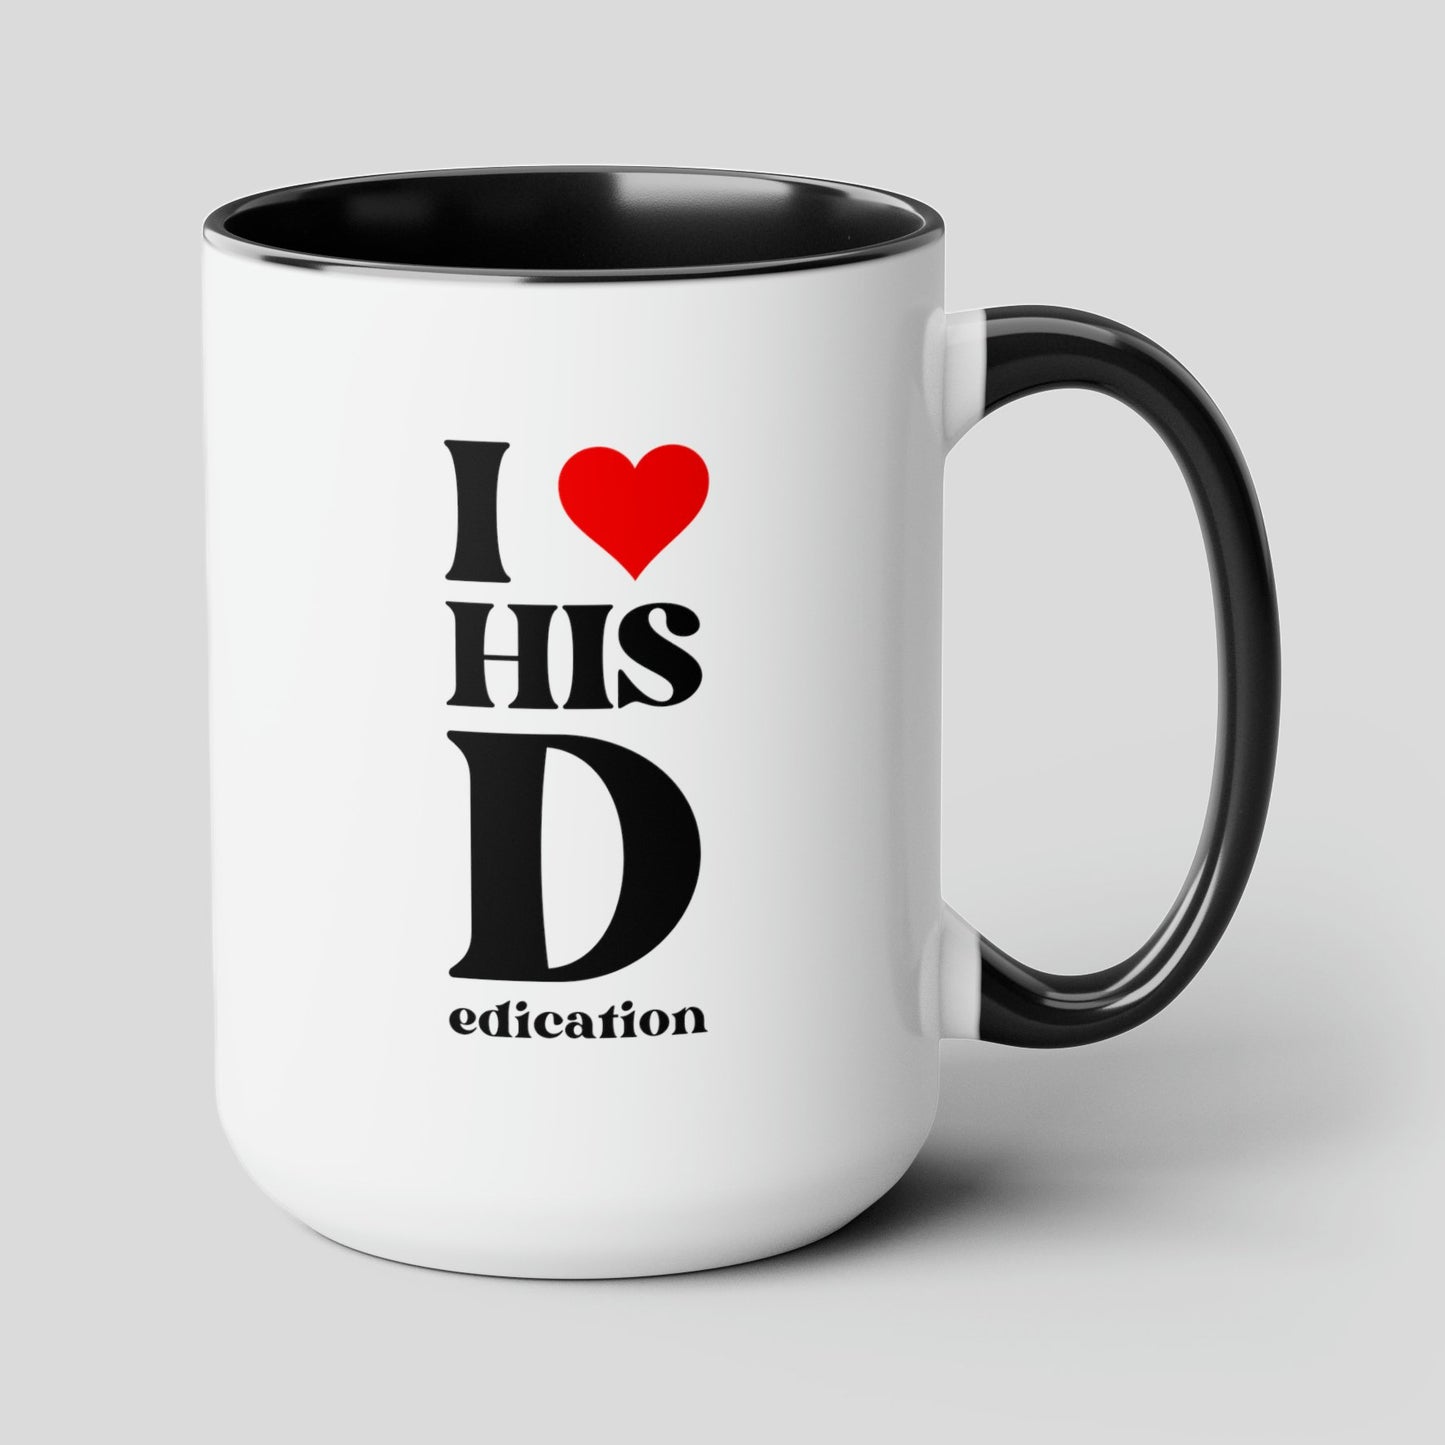 I Heart His Dedication 15oz white with black accent funny large coffee mug gift for him boyfriend men husband valentines anniversary waveywares wavey wares wavywares wavy wares cover